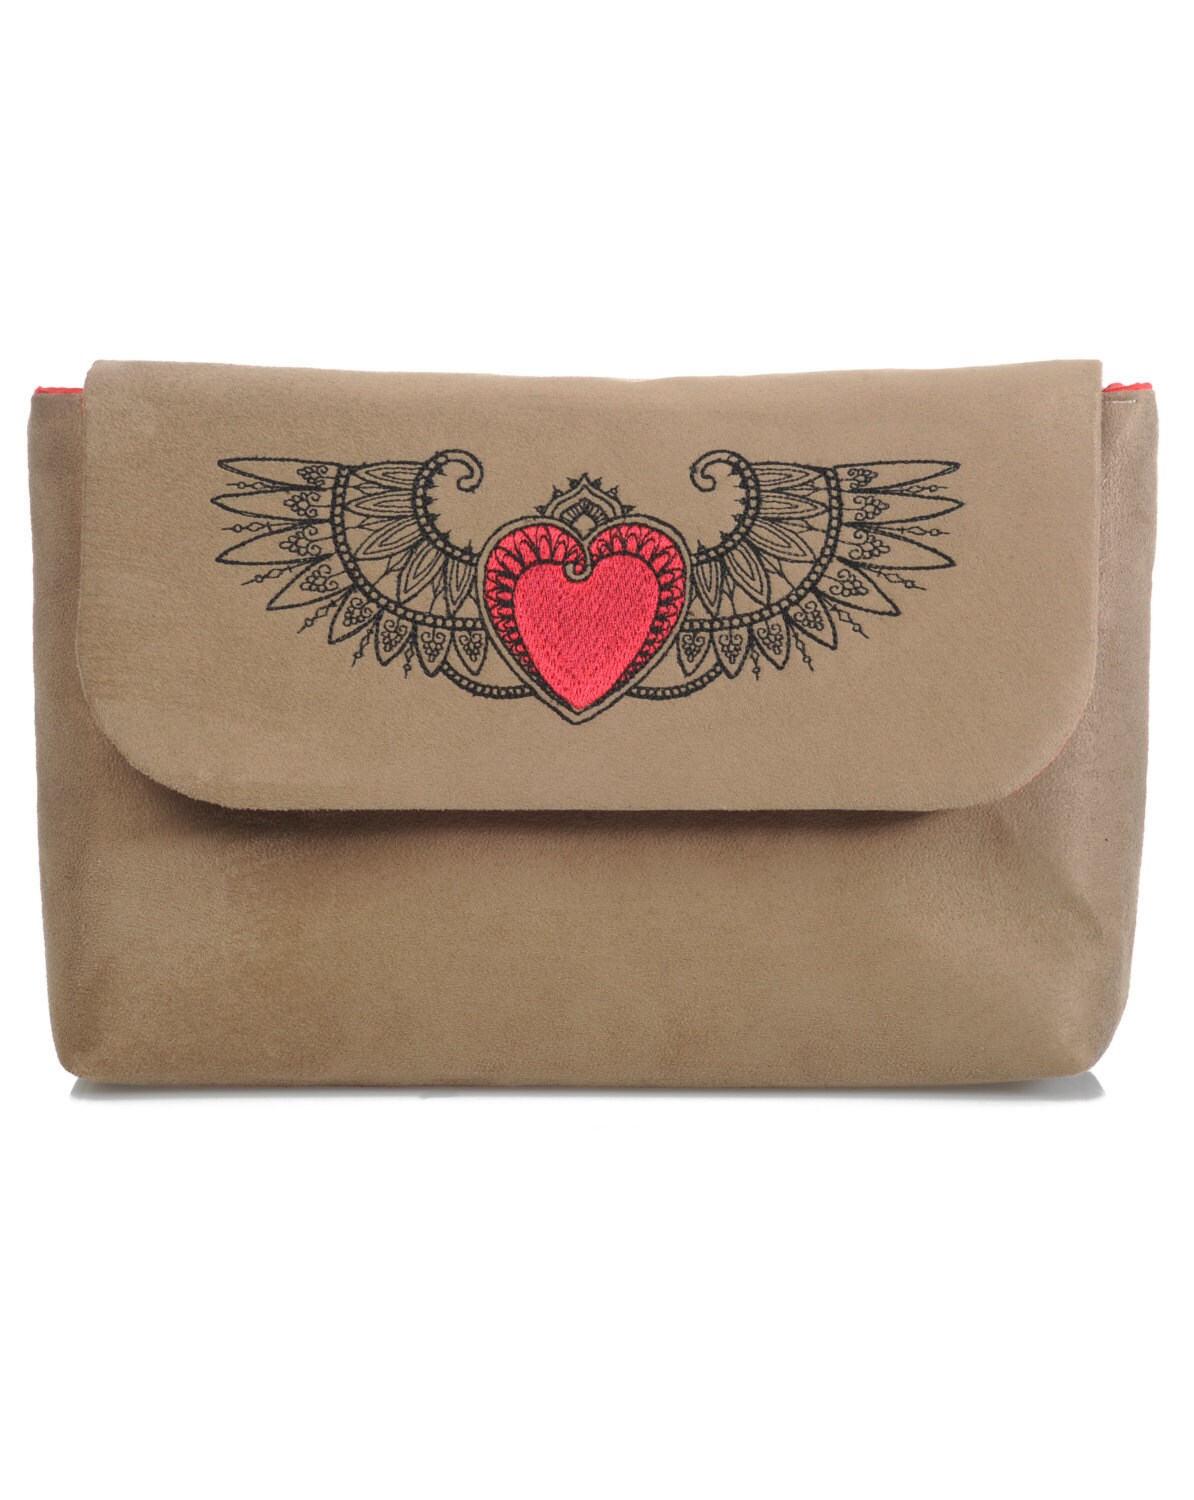 Tan Suede Clutch. Winged Heart Clutch Purse in sand | Etsy